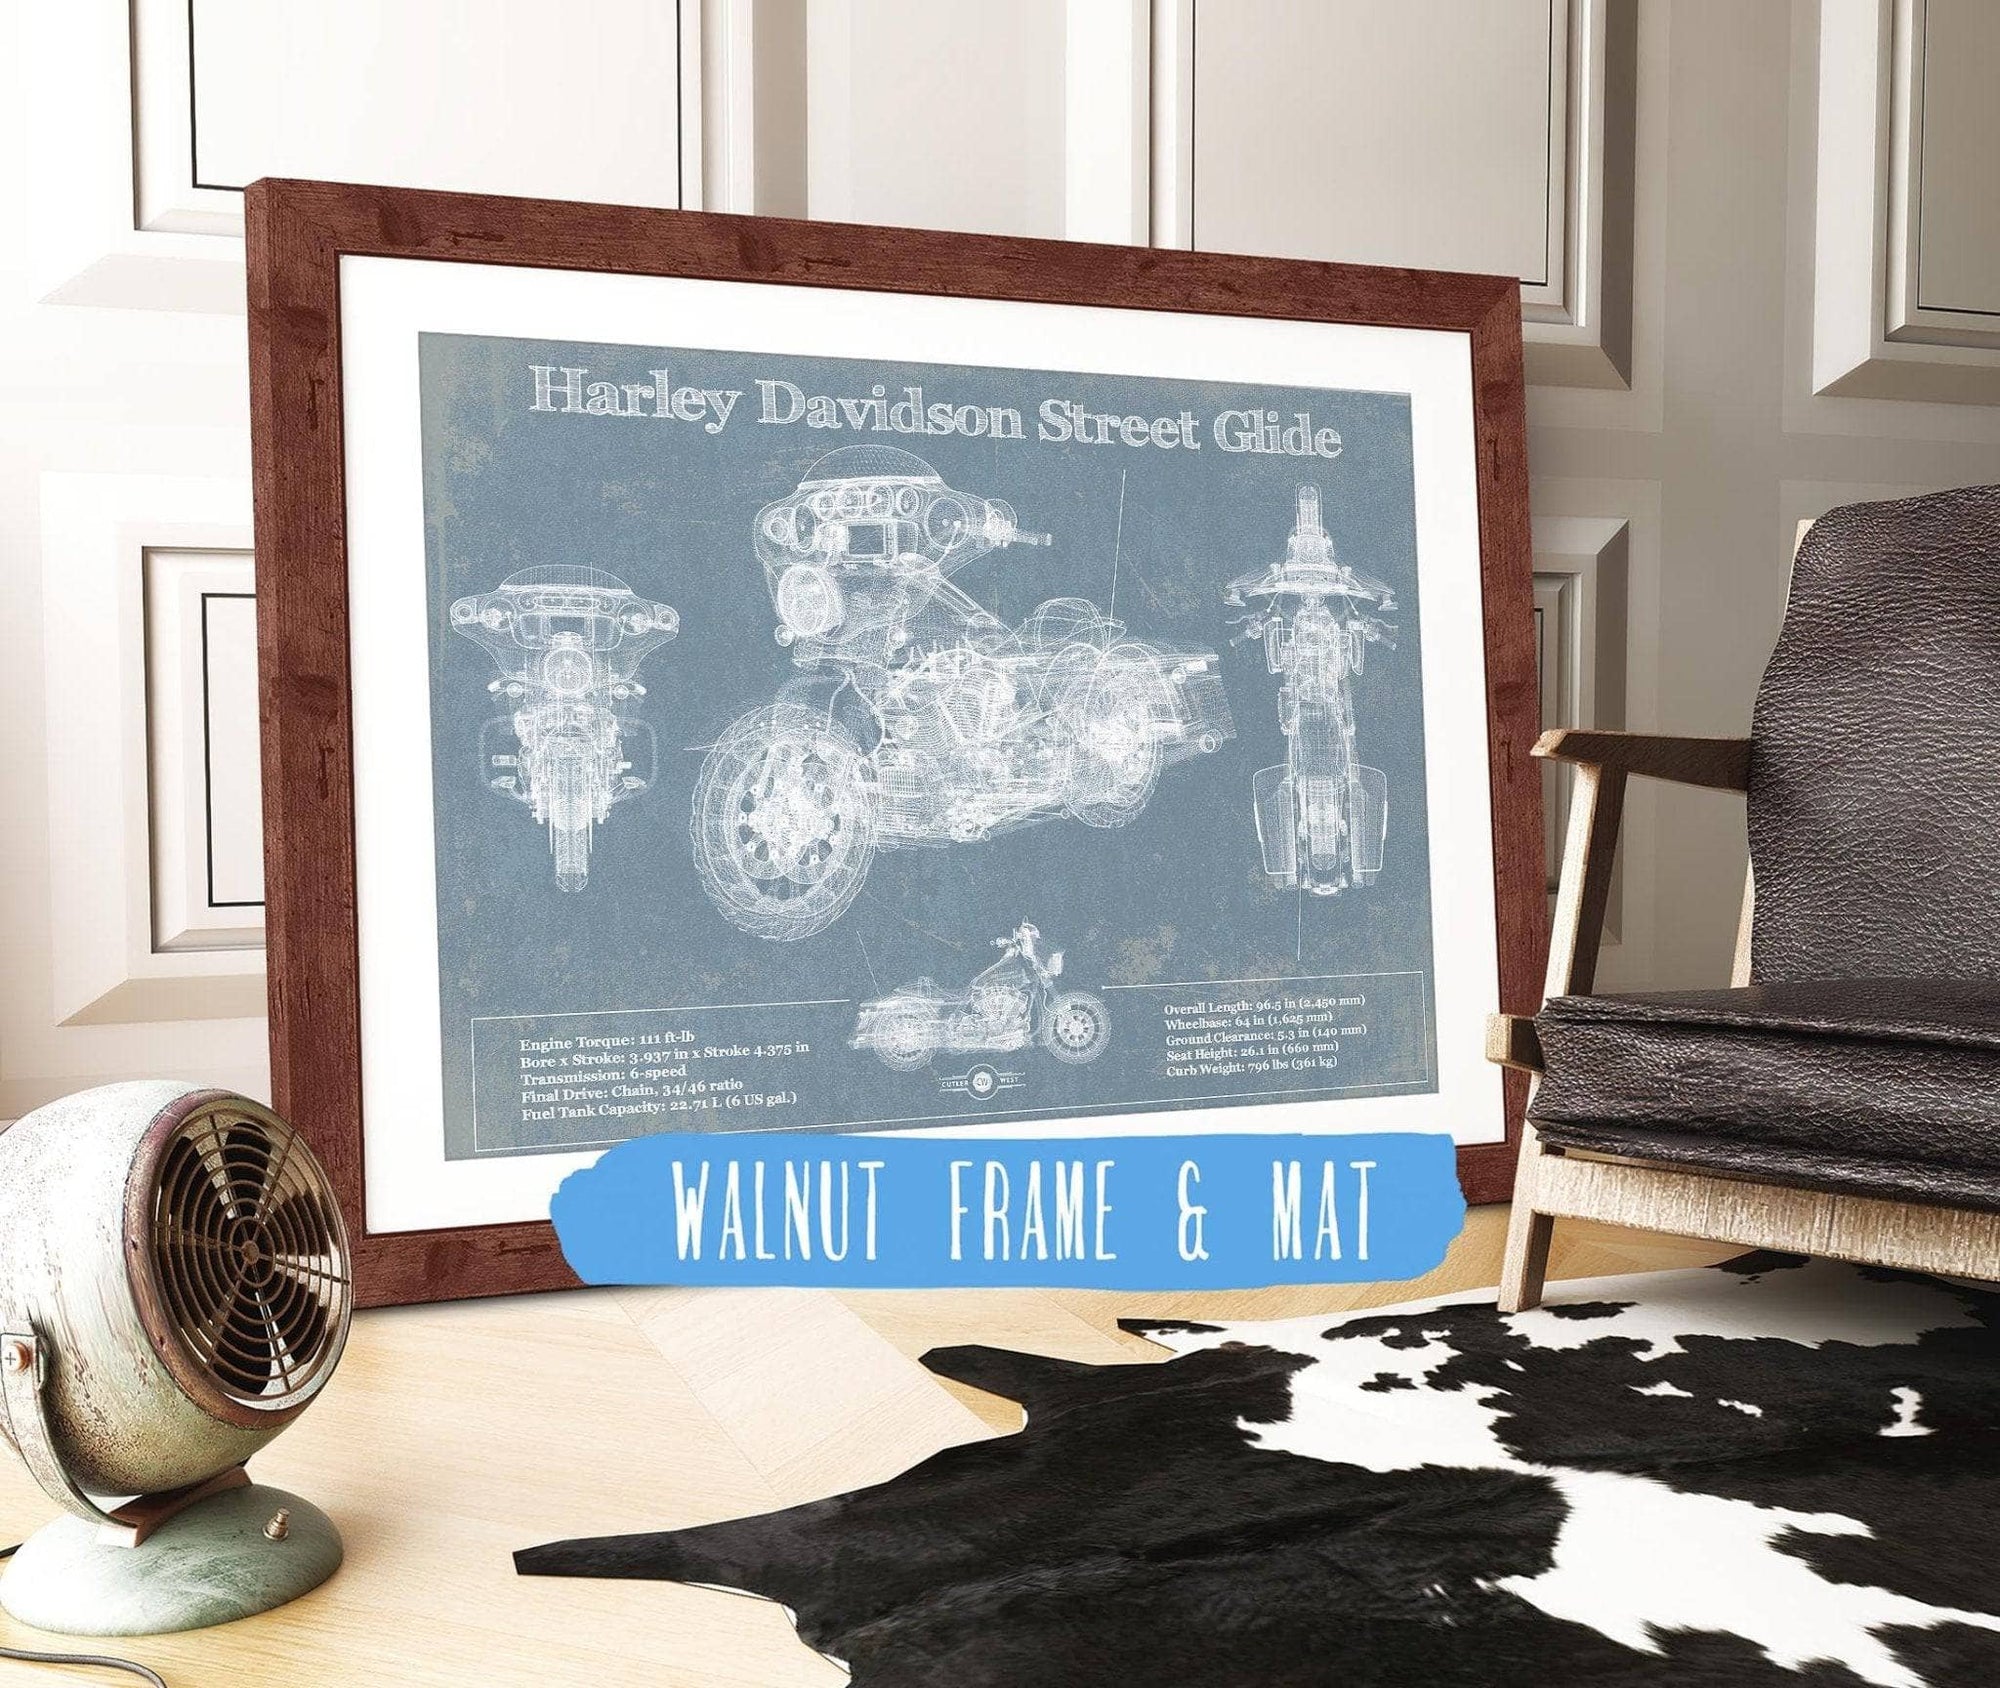 Cutler West Best Selling Collection 14" x 11" / Walnut Frame & Mat Harley Davidson Street Glide Motorcycle Patent Print 833110106-TOP